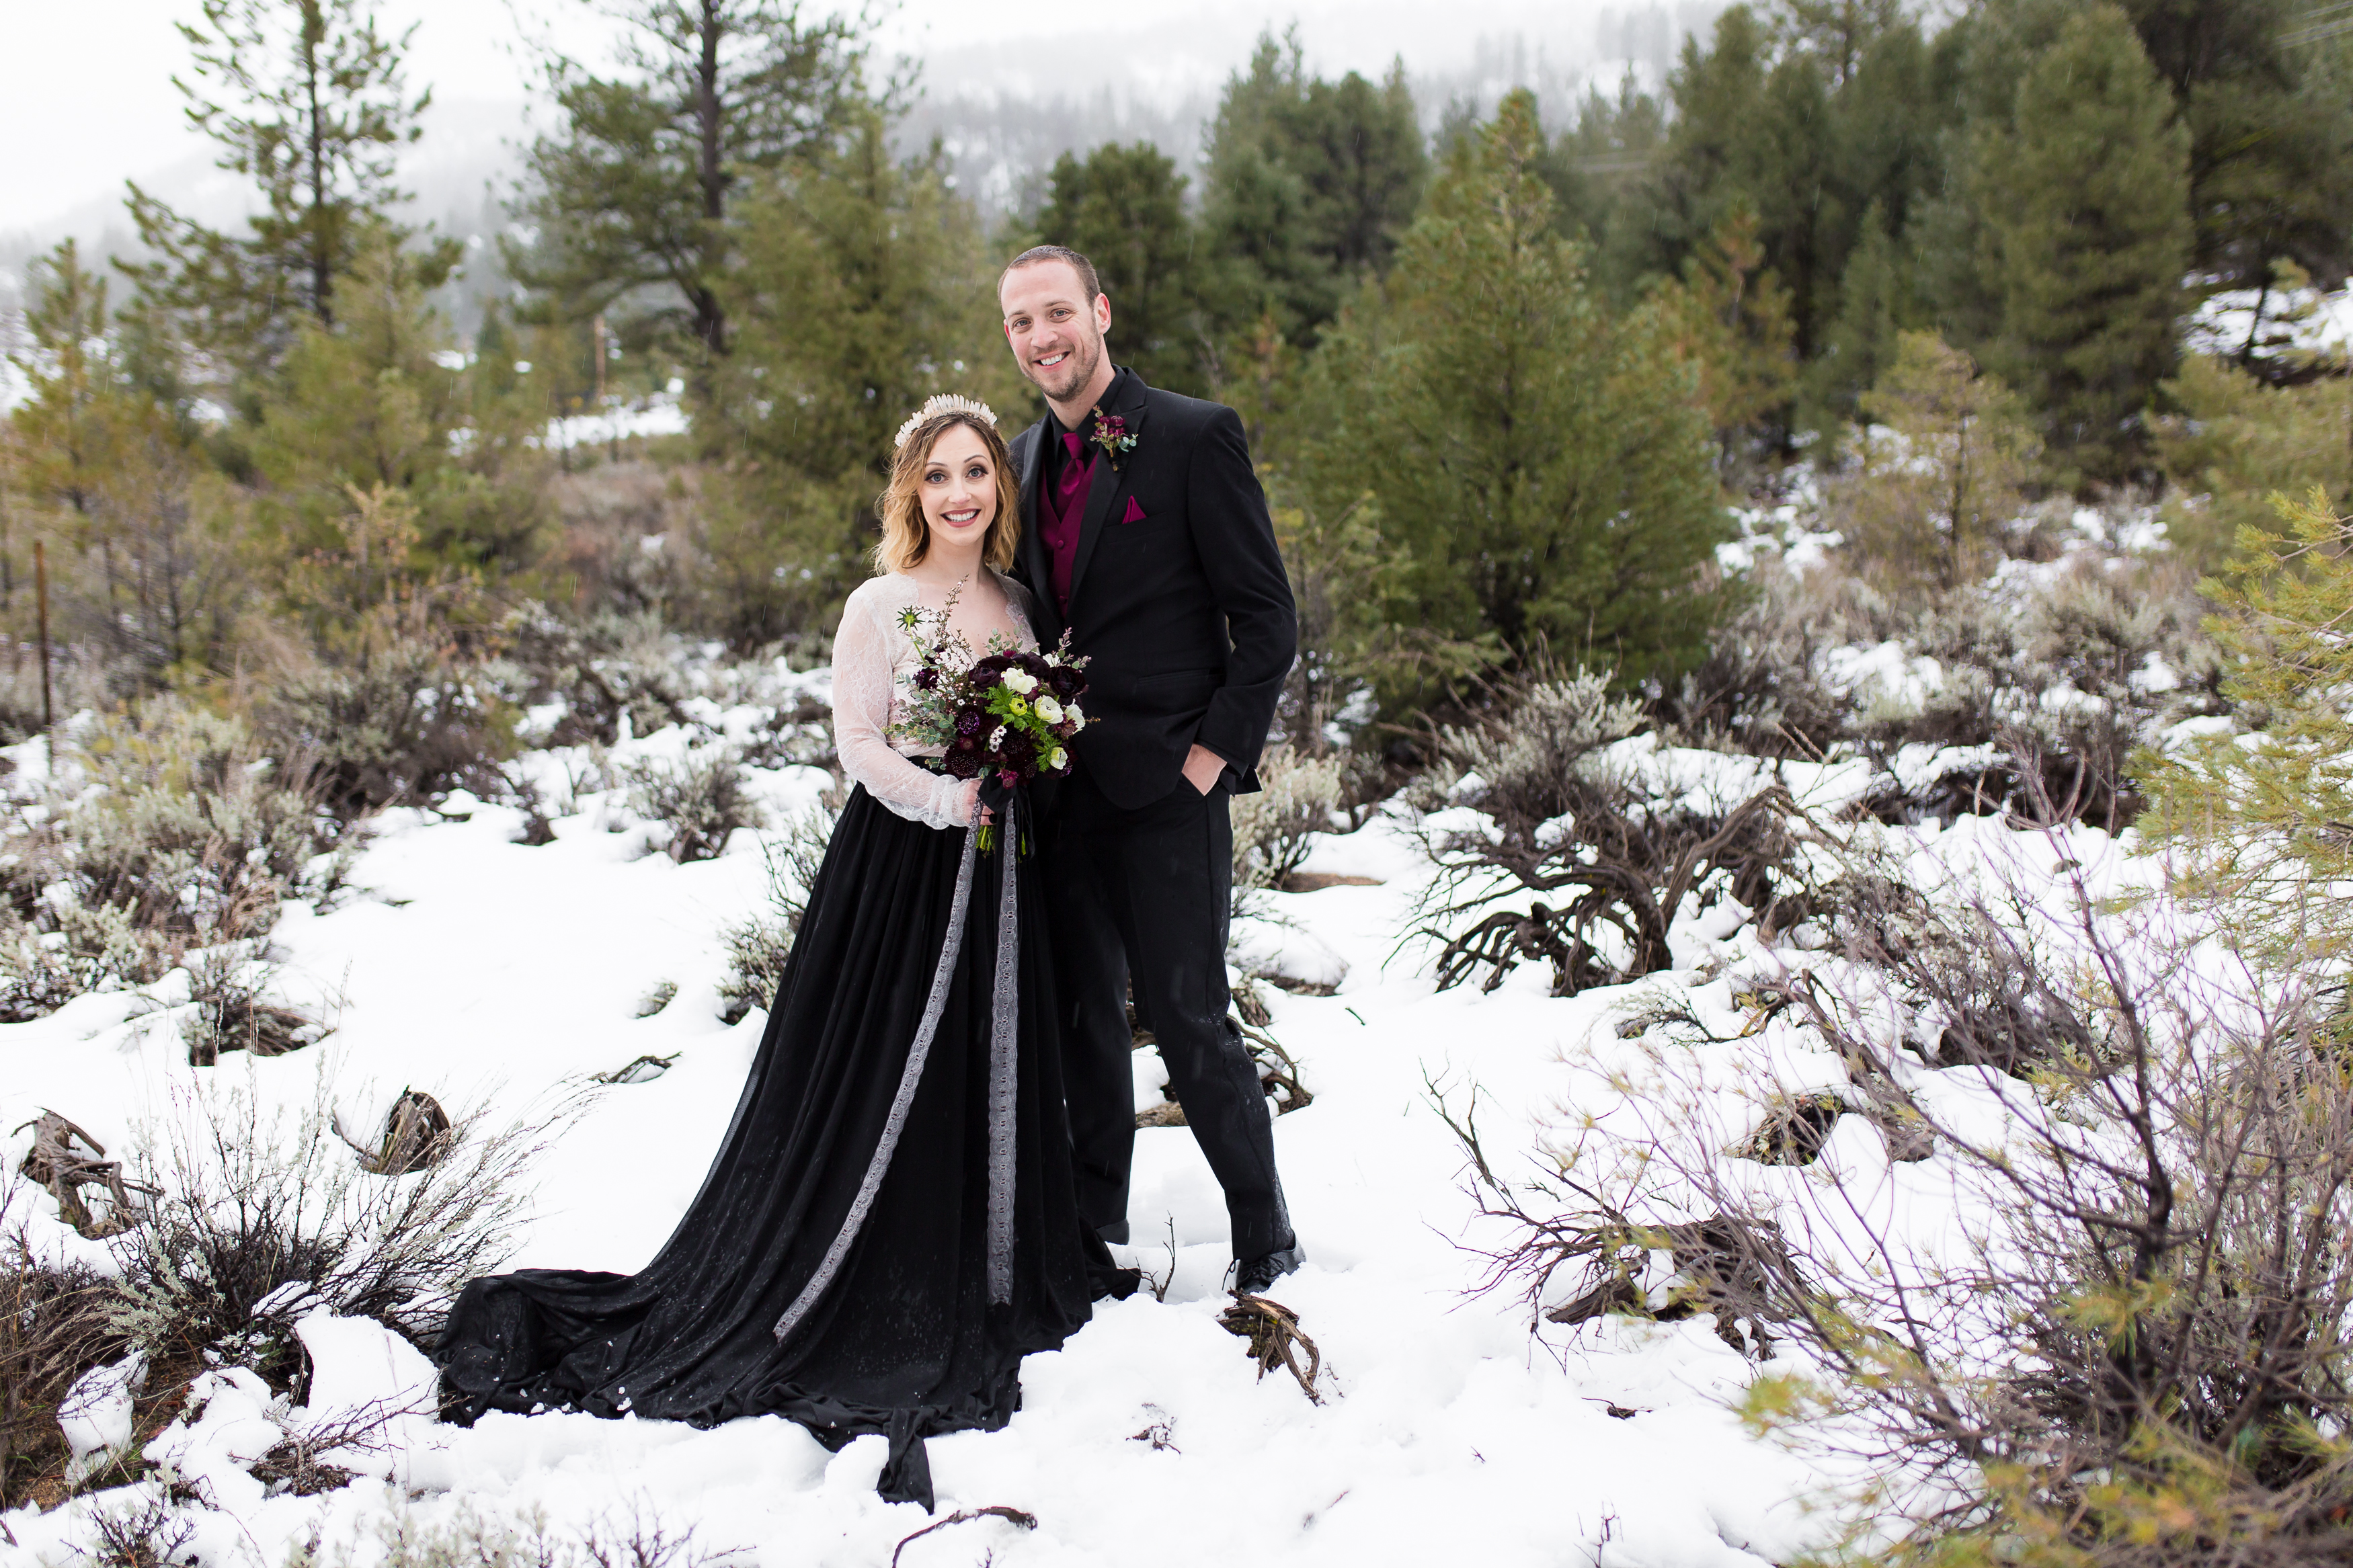 Beautiful bride and groom in snow during wedding in Frazier Park